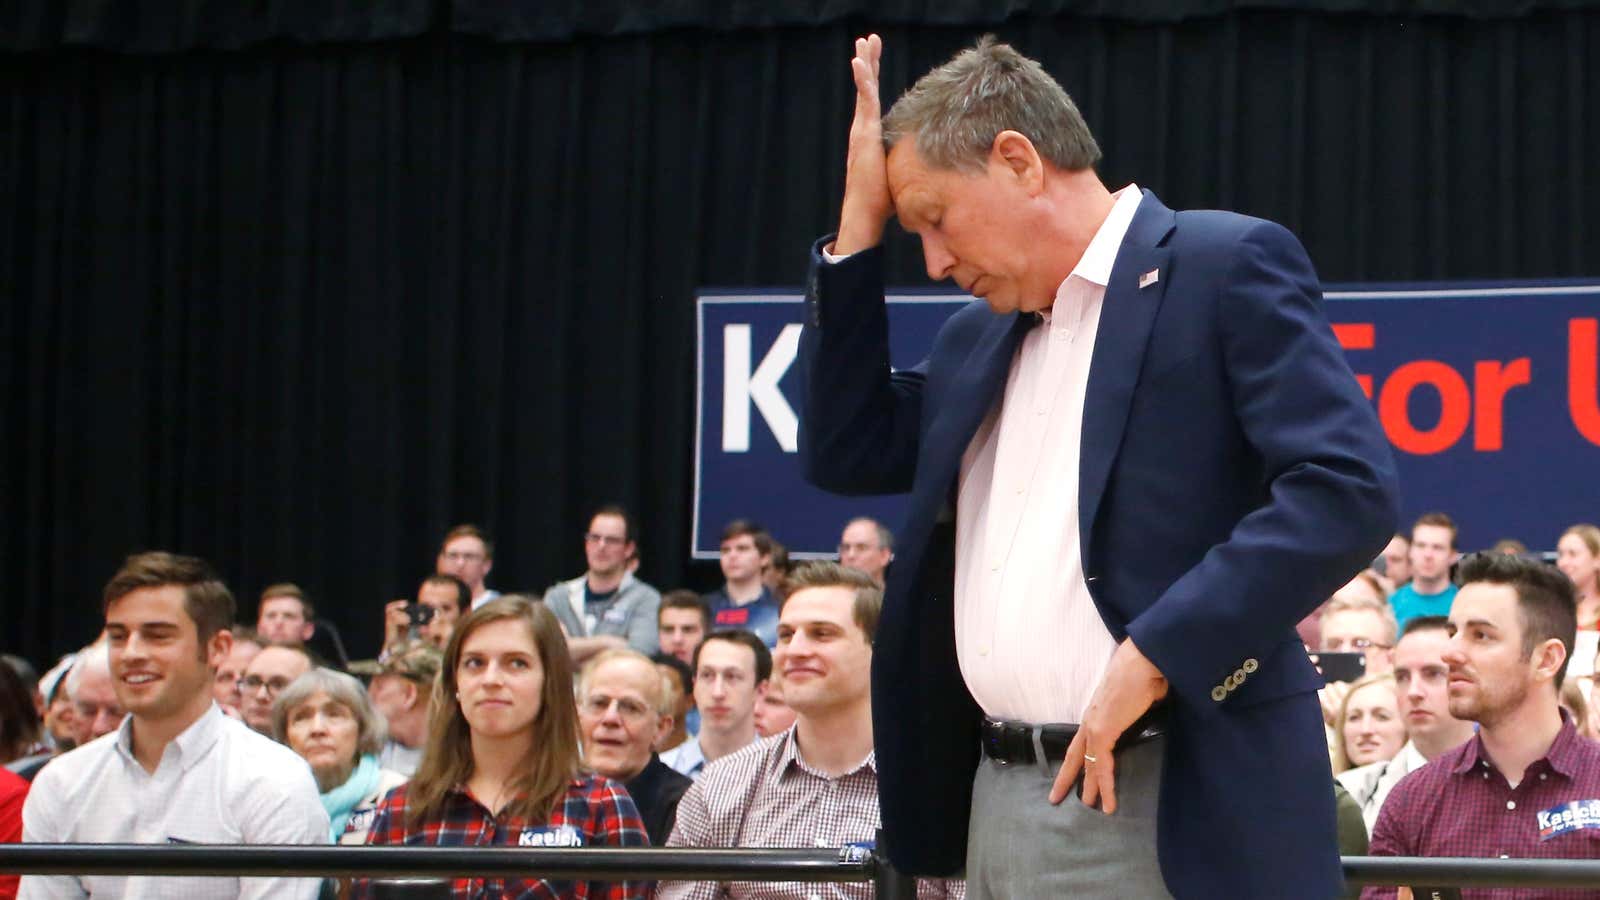 It’s the end of the road for John Kasich.